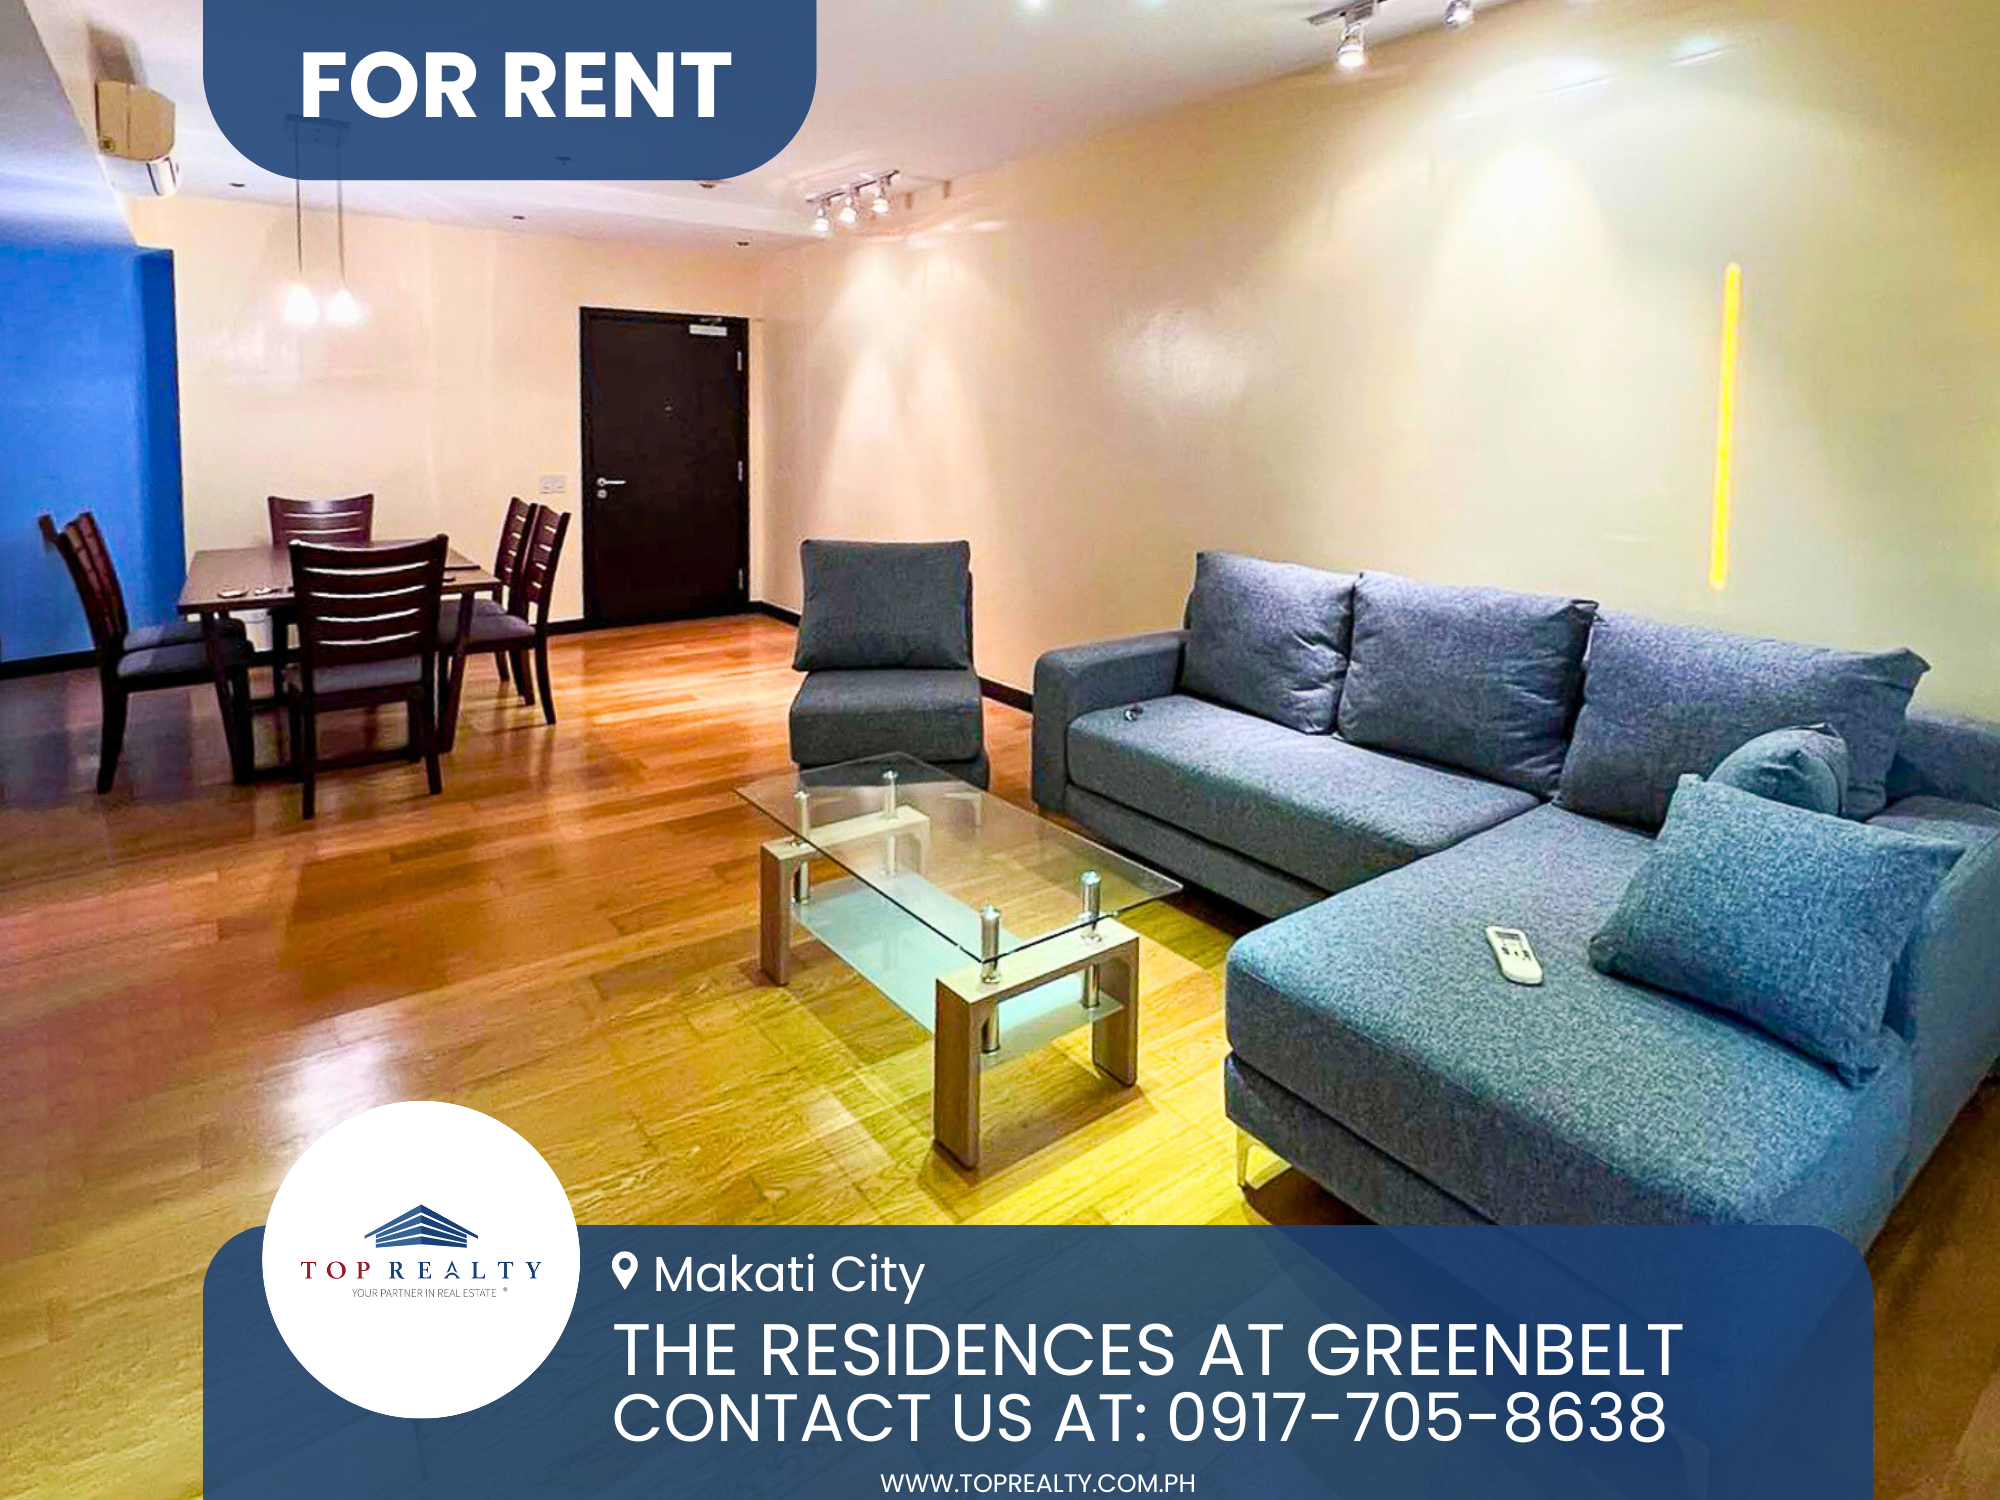 Condo for Rent in Makati City at The Residences at Greenbelt